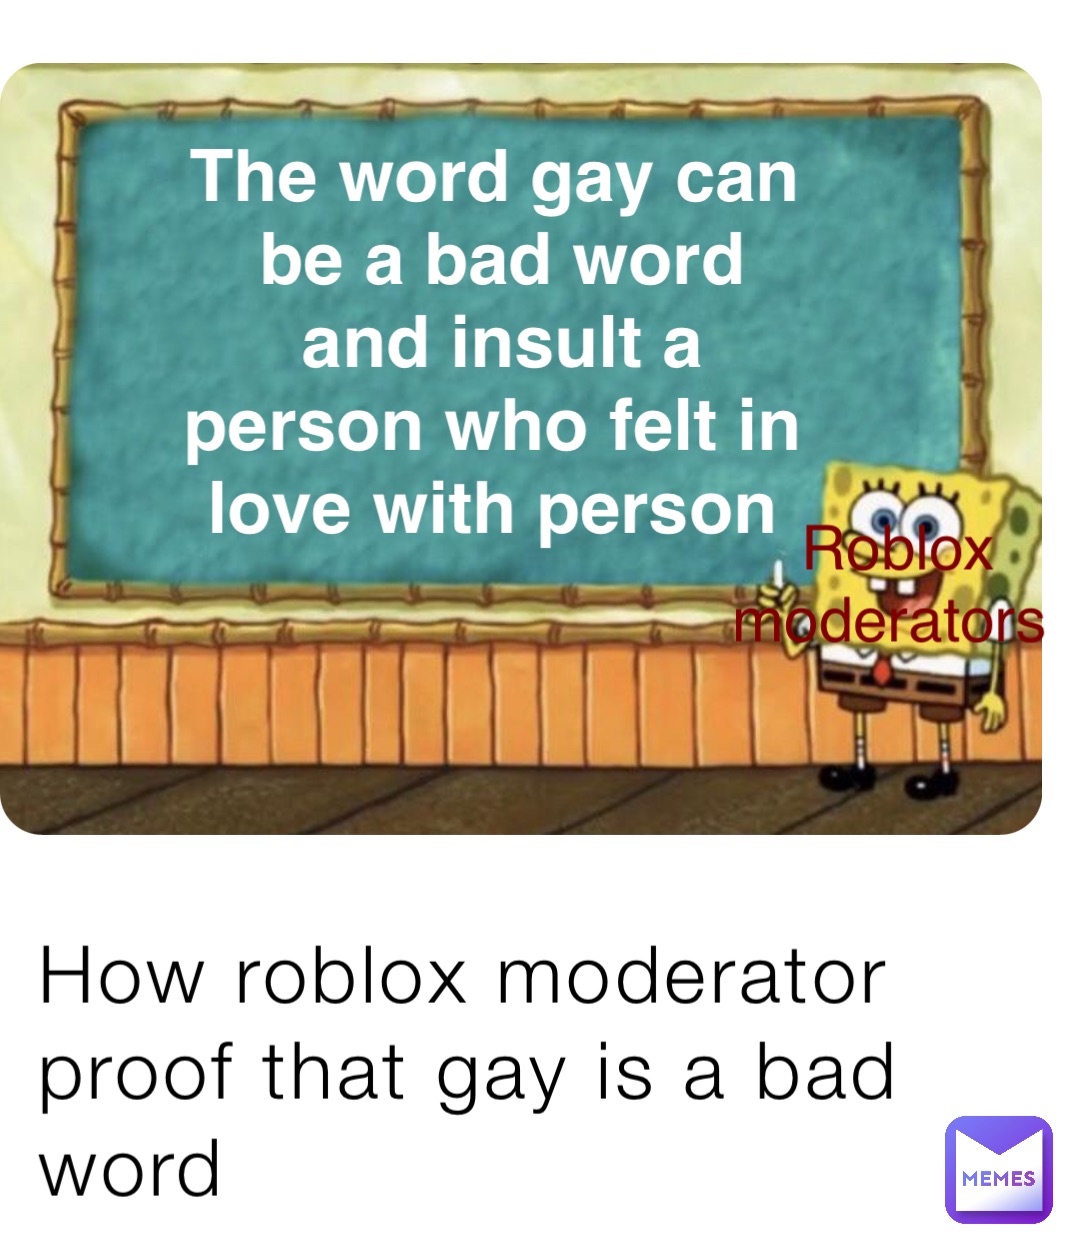 How roblox moderator proof that gay is a bad word The word gay can be a bad word and insult a person who felt in love with person Roblox moderators